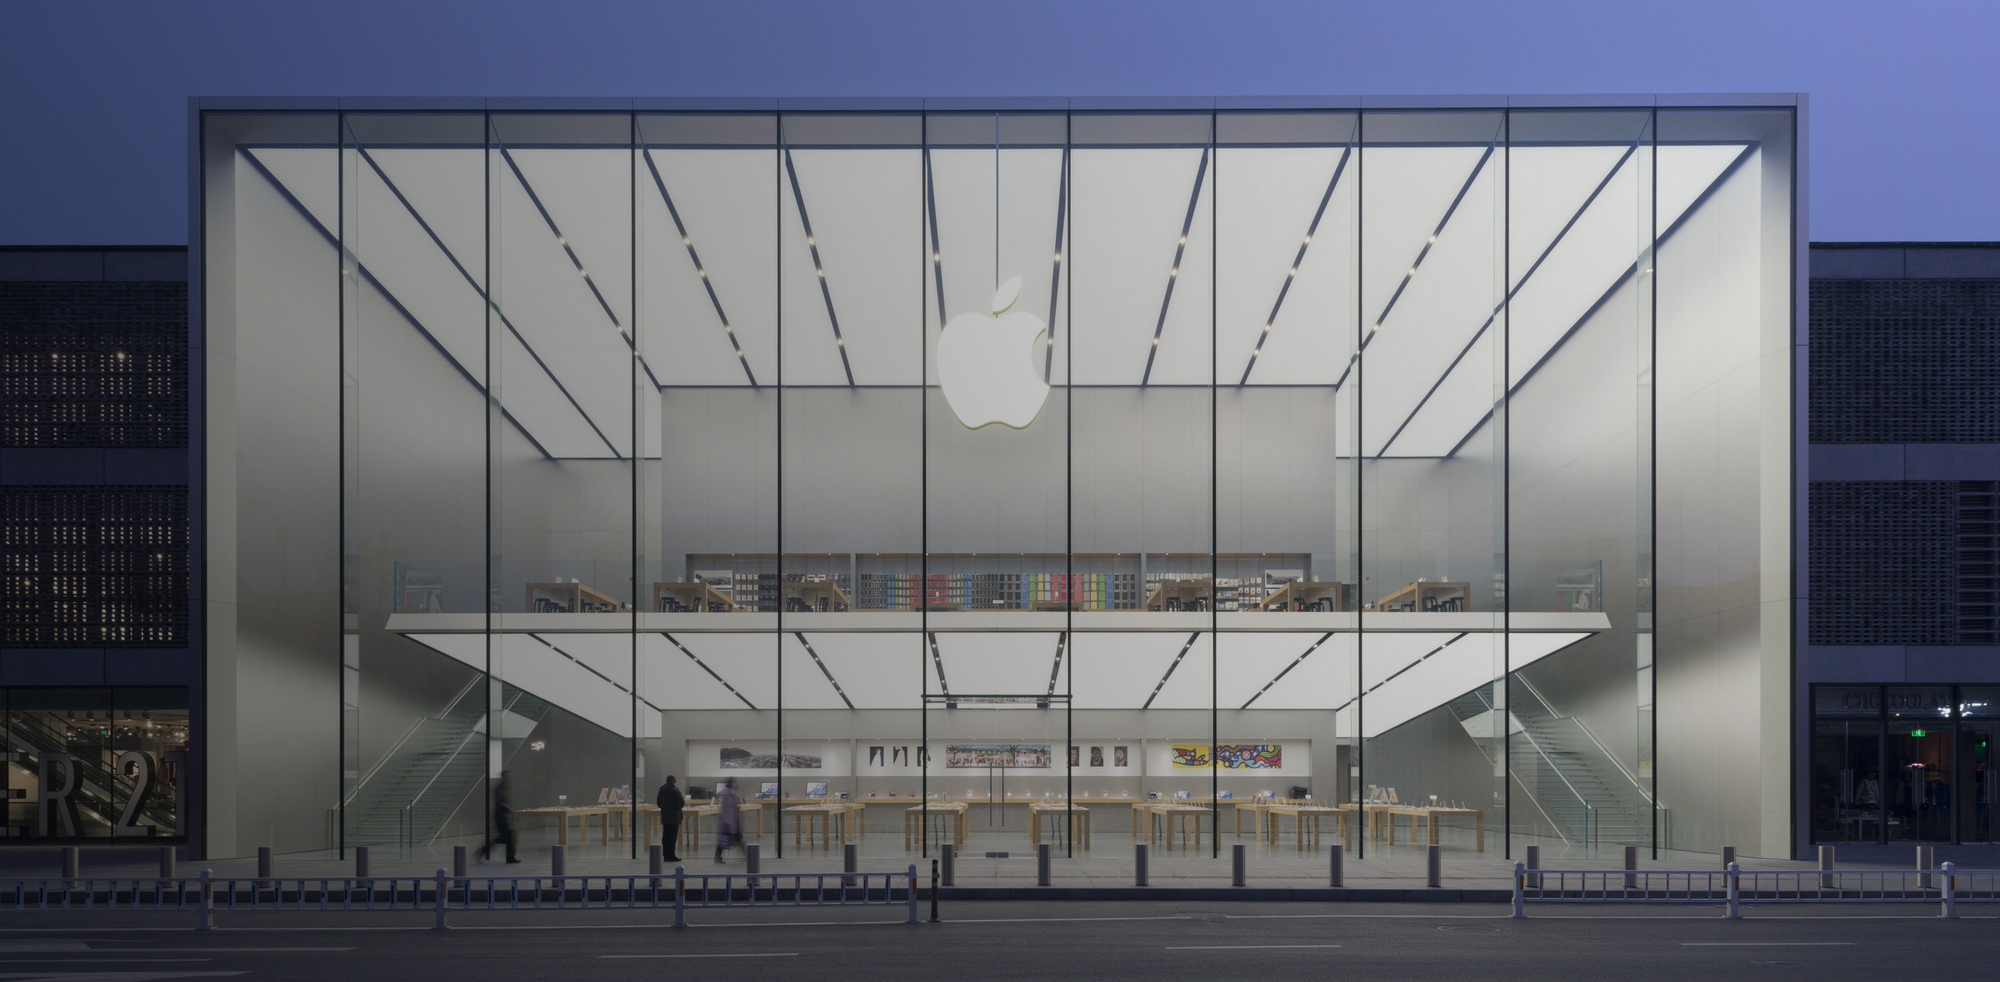 Apple Store in 5th Avenue : Updated 2023 Guide to Make an Appointment